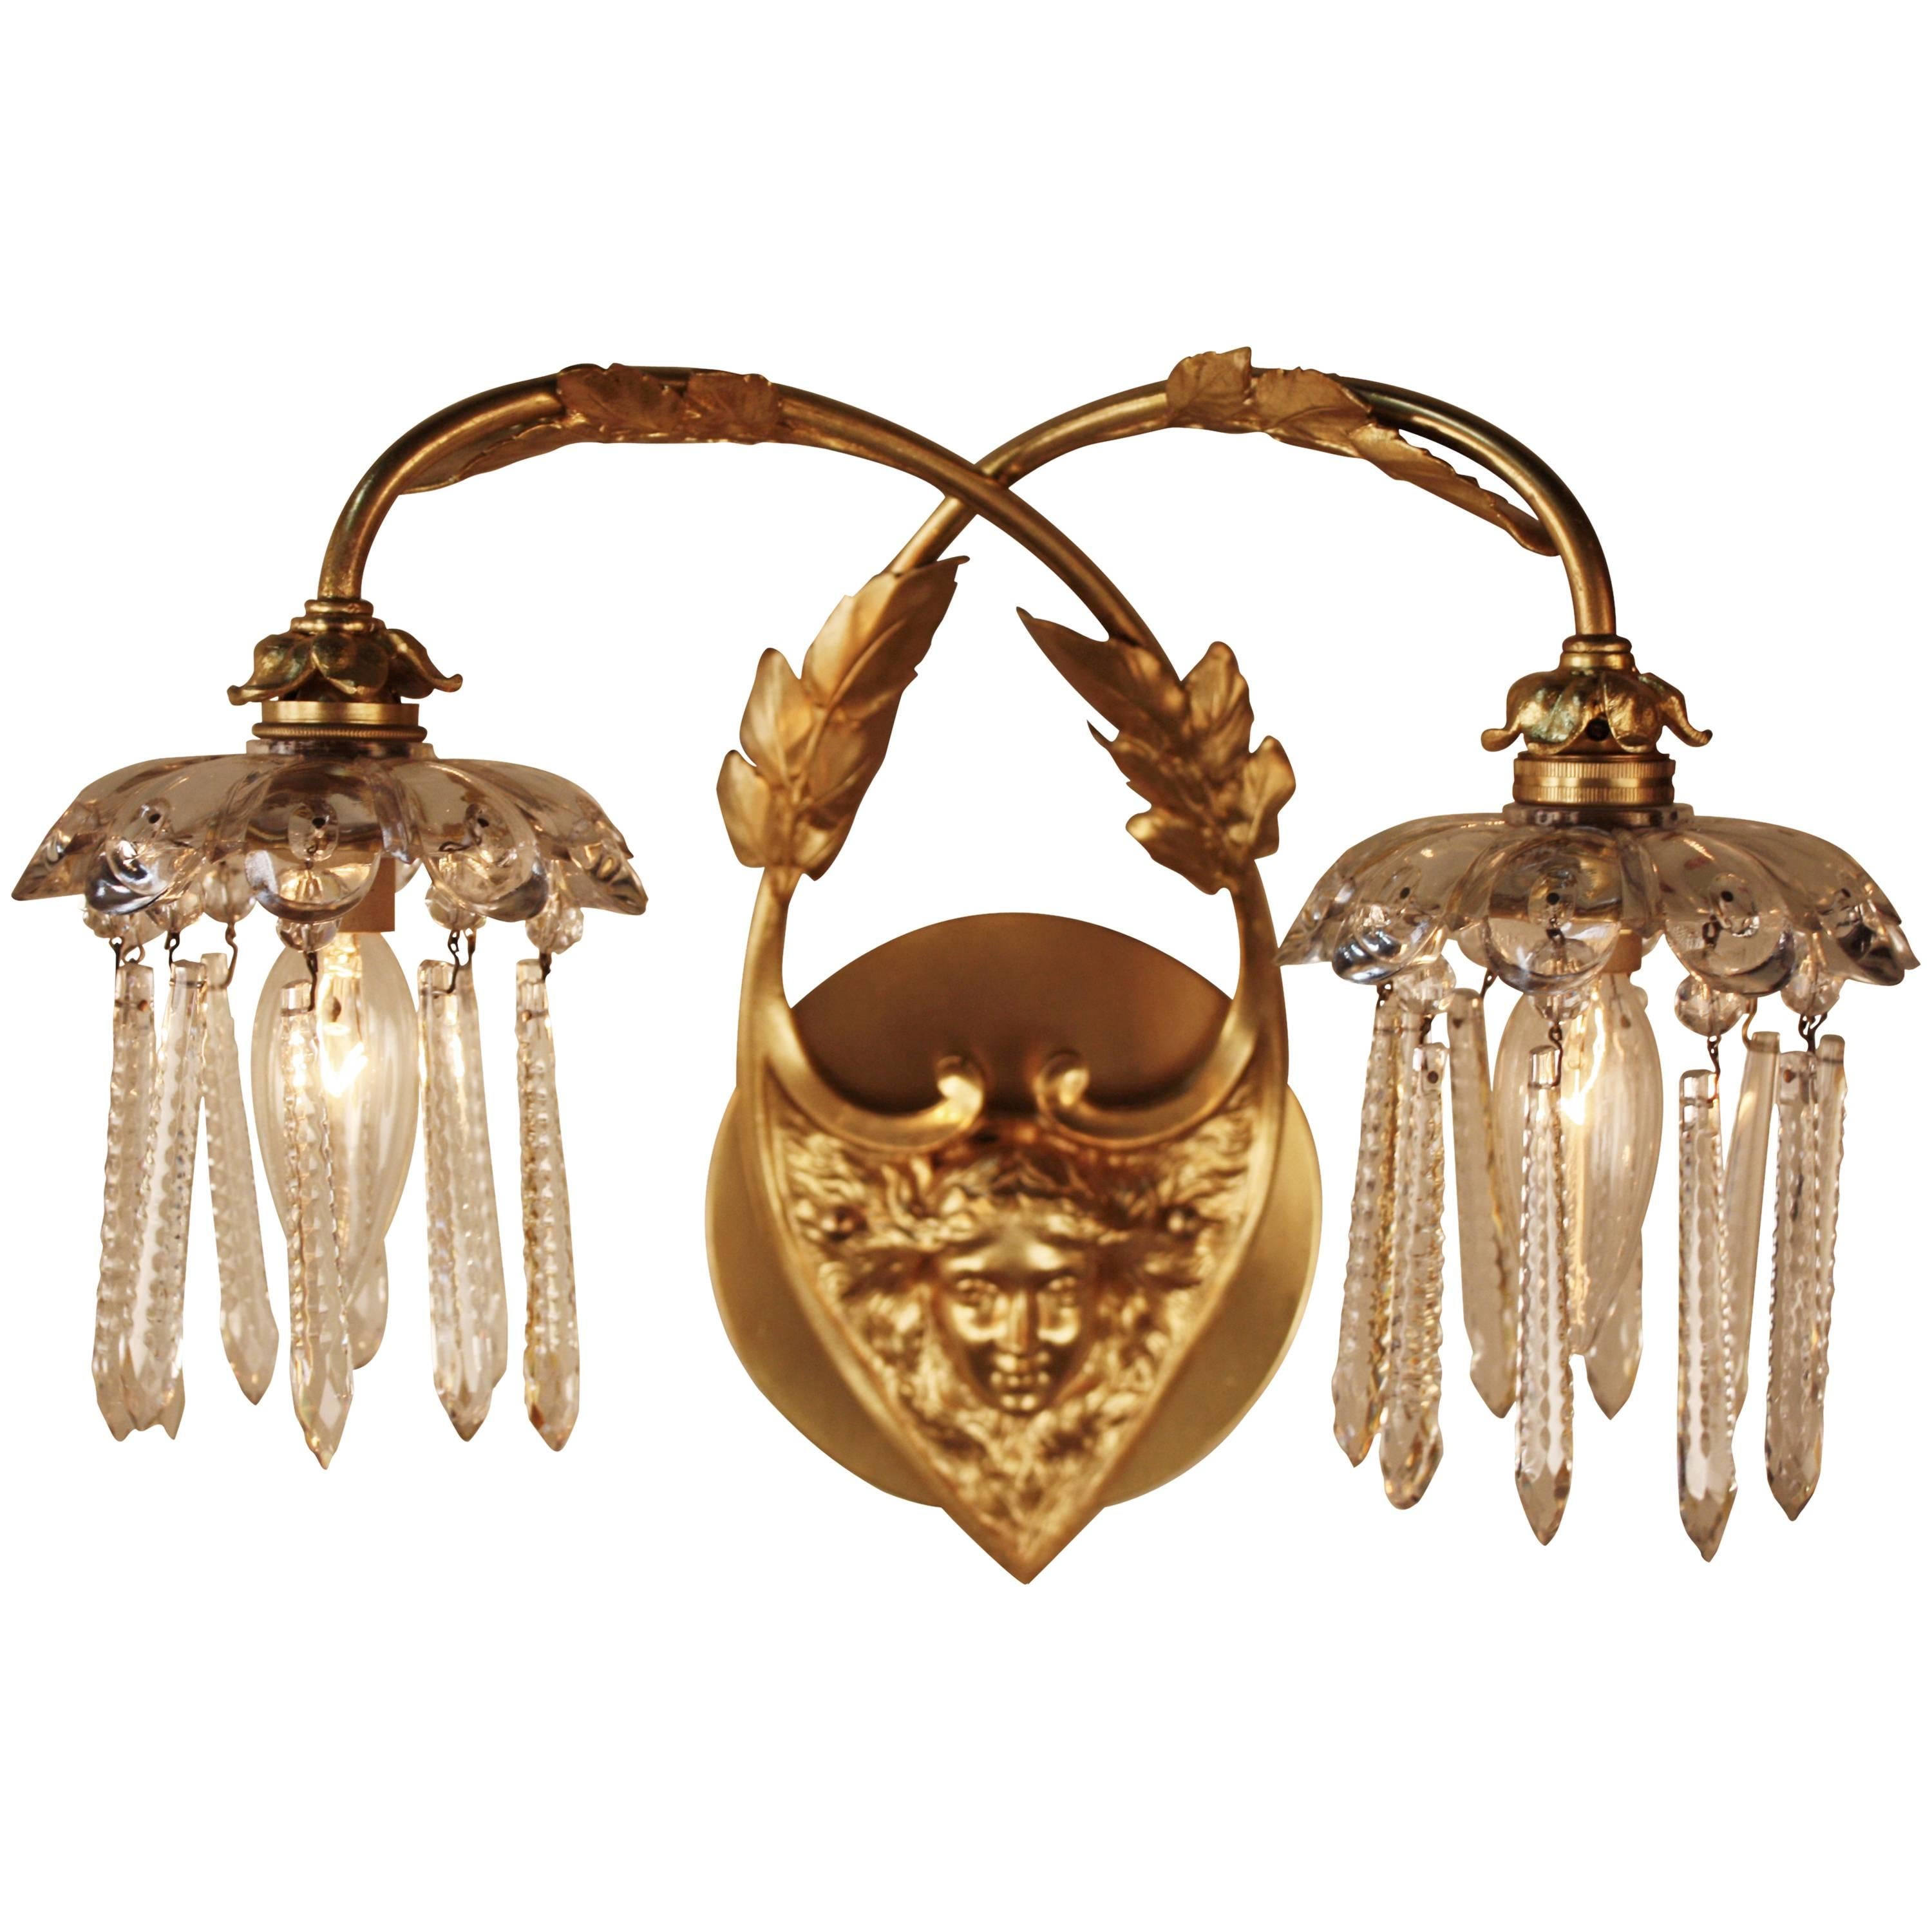 Pair of Art Nouveau Bronze and Crystal Wall Sconces by Greiner